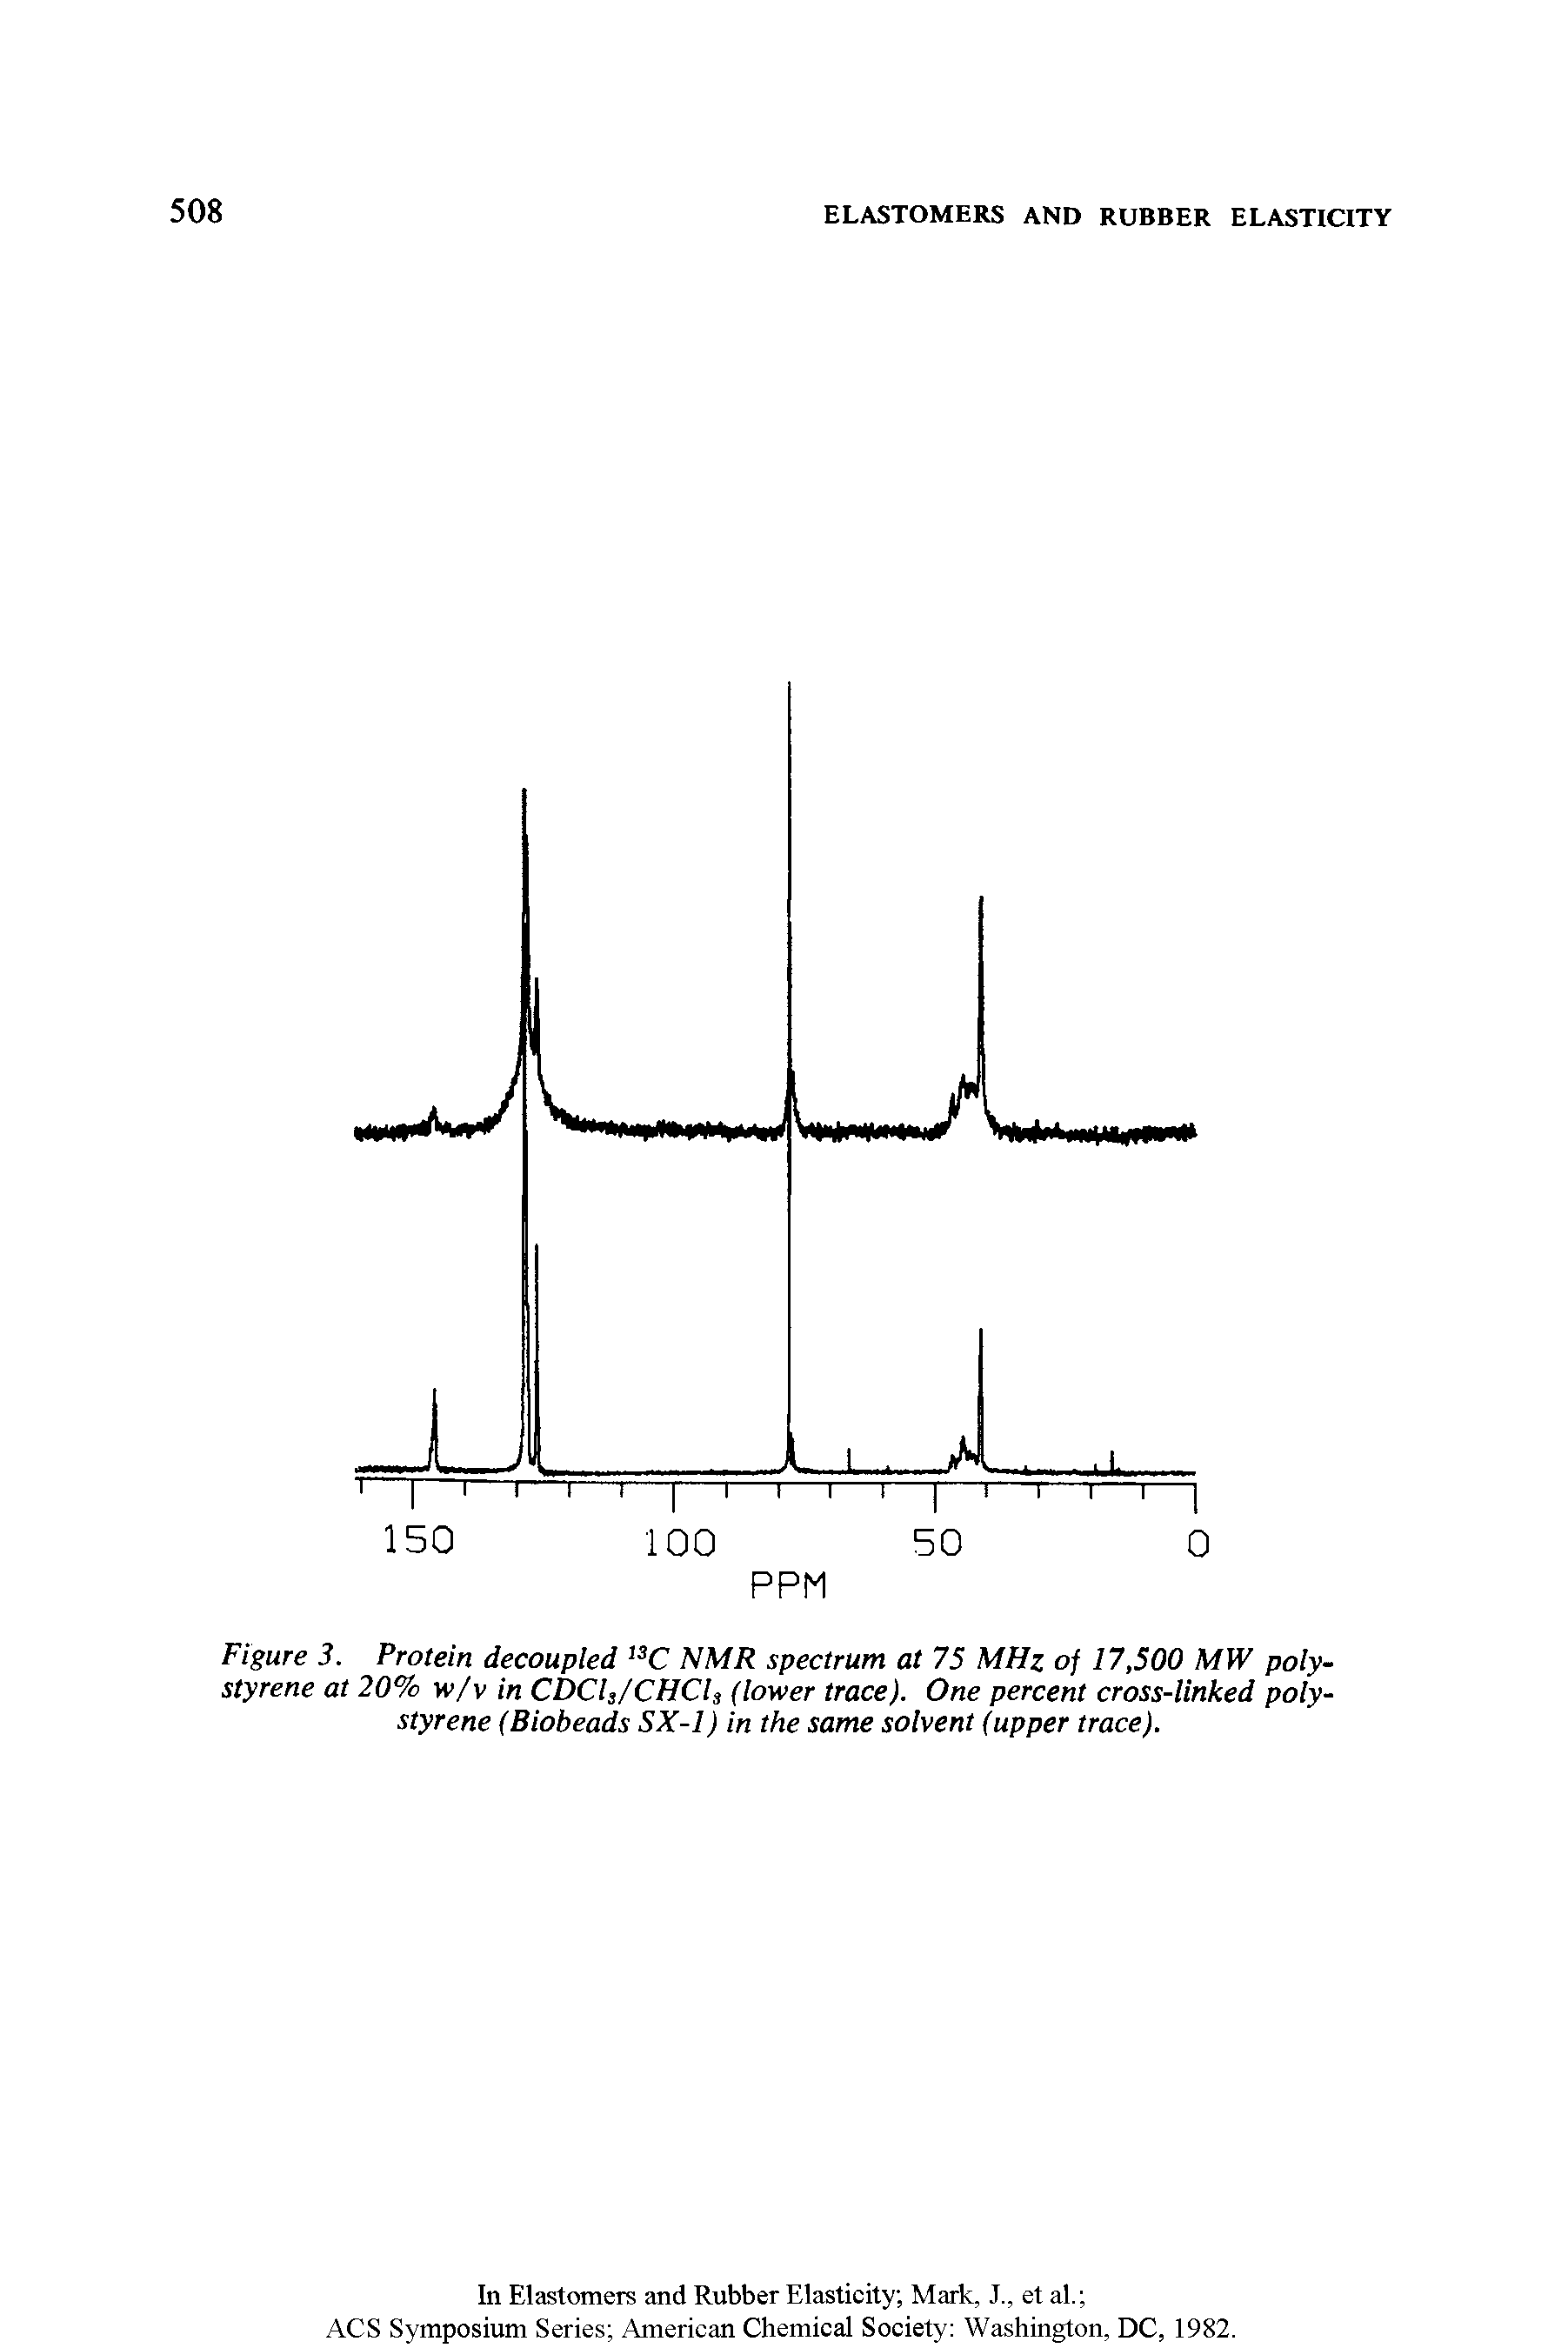 Figure 3. Protein decoupled 13C NMR spectrum at 75 MHz of 17,500 MW polystyrene at 20% w/v in CDCU/CHCU (lower trace). One percent cross-linked polystyrene (Biobeads SX-1) in the same solvent (upper trace).